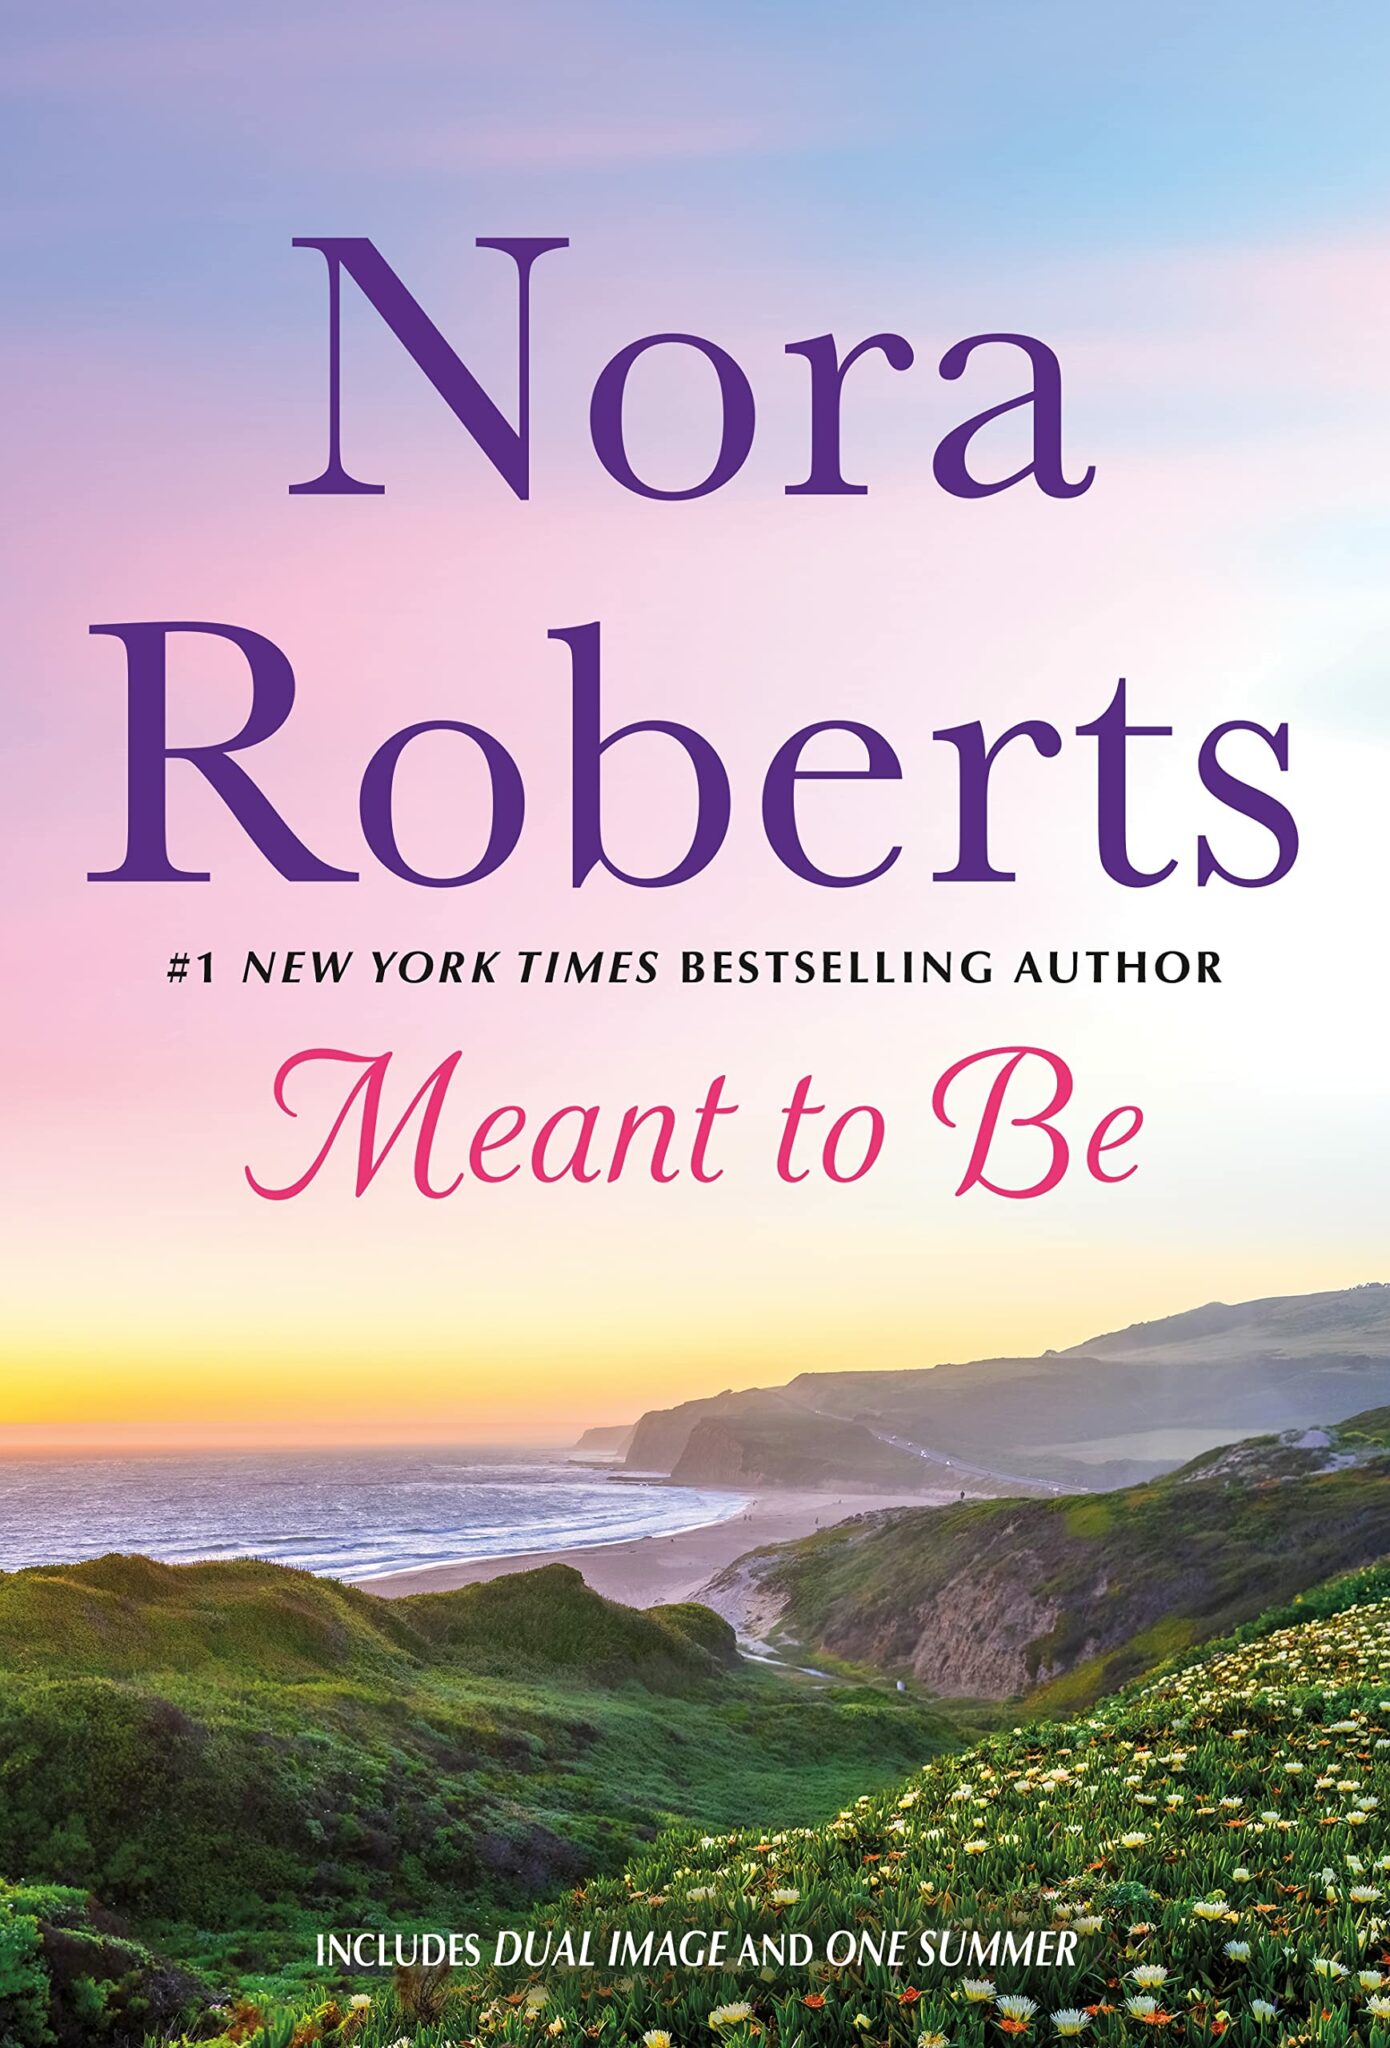 Nora Roberts Books 2023: All New Releases This Year - Check Reads